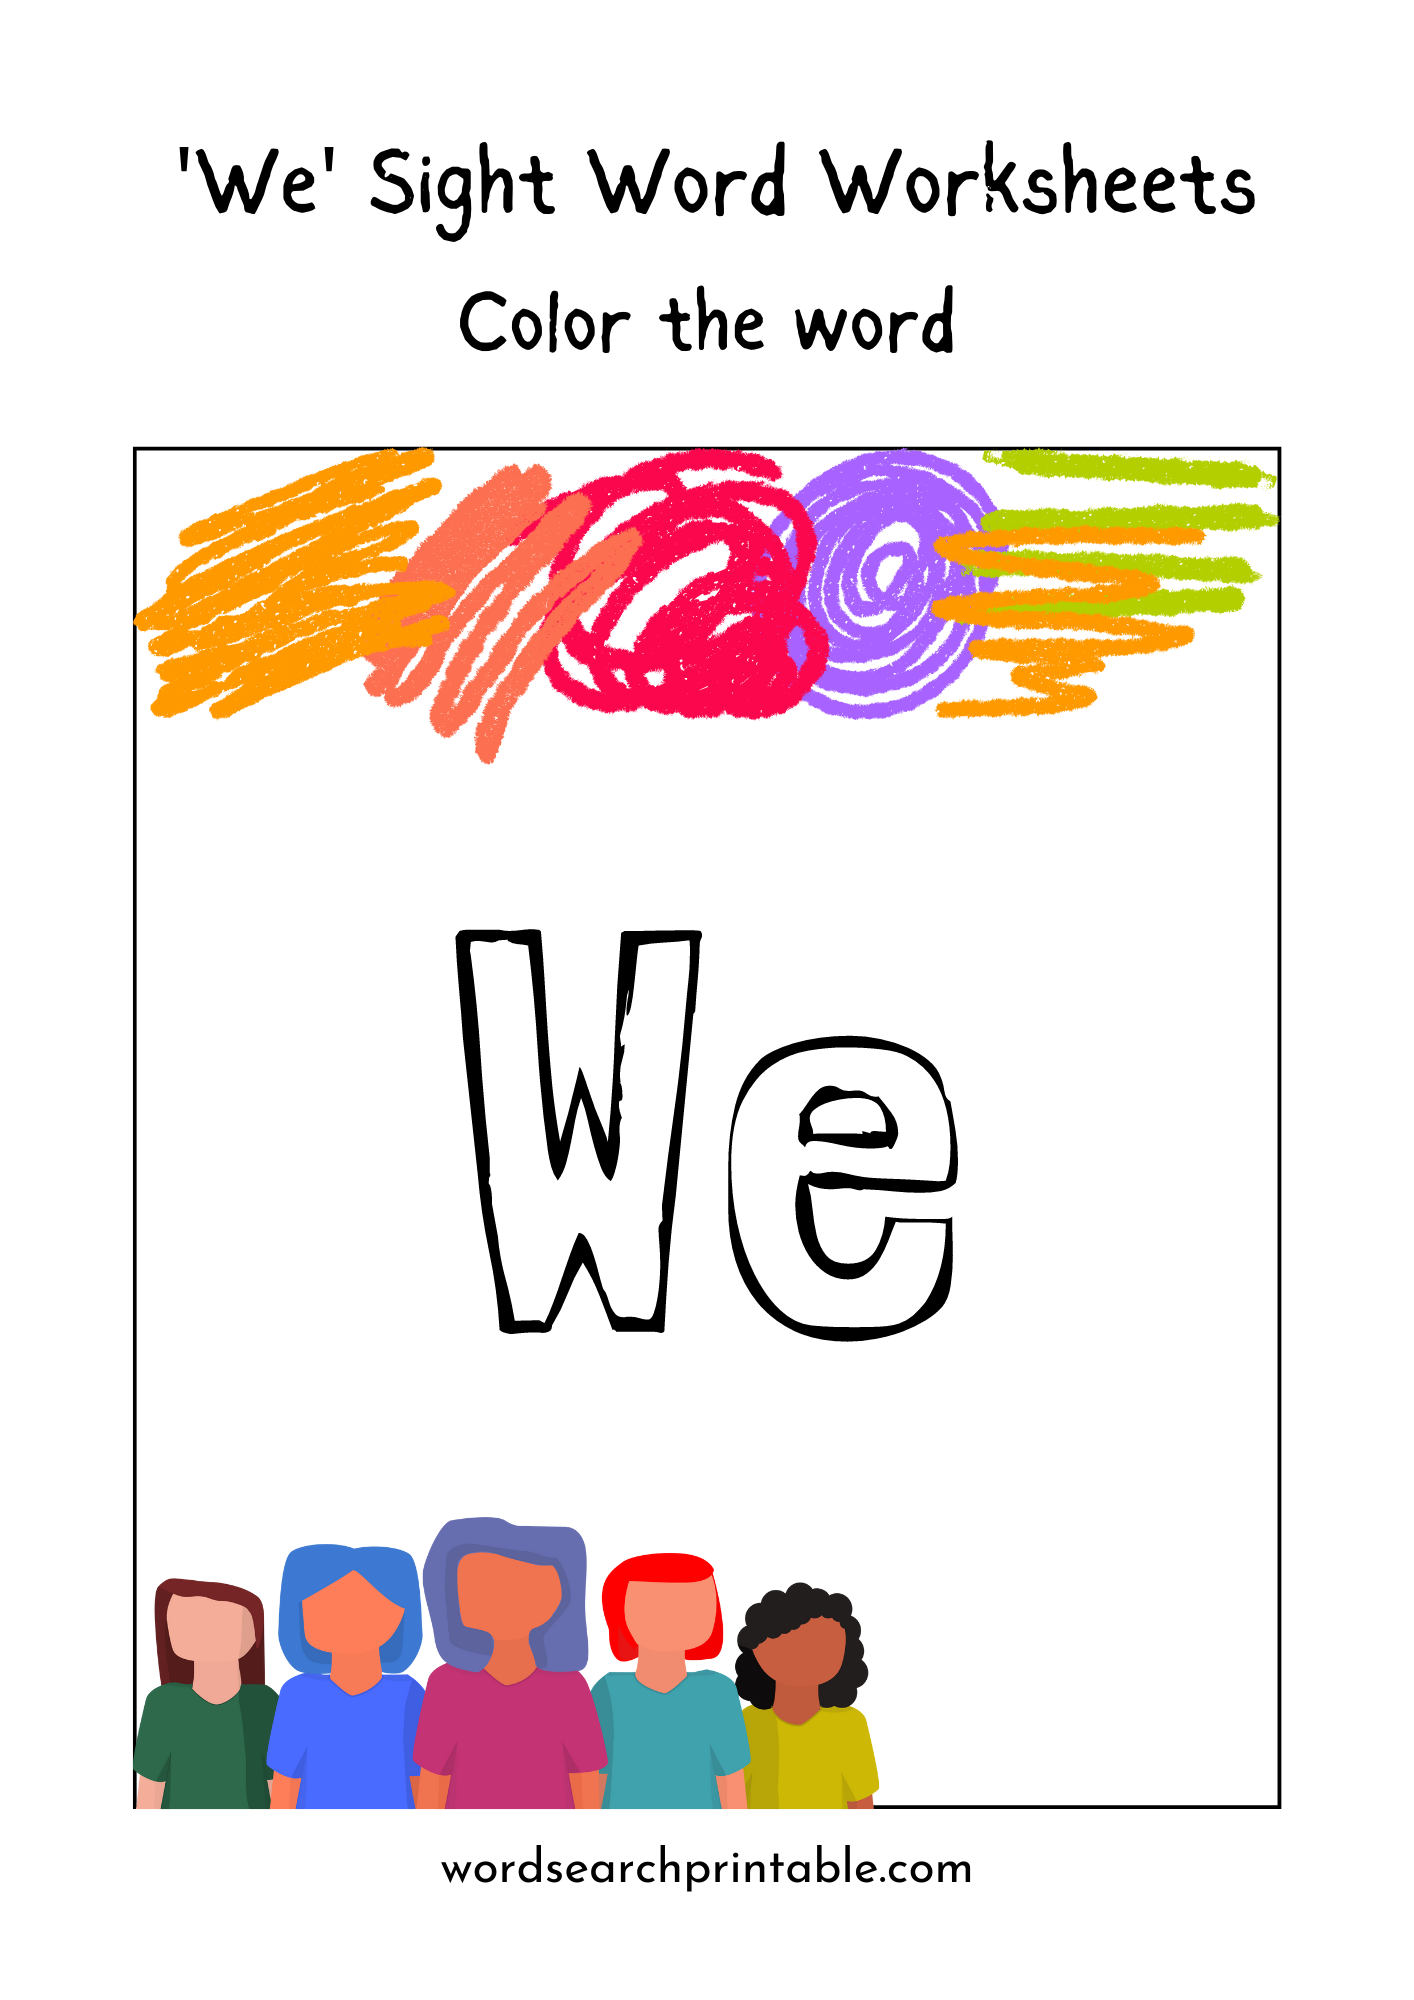 we sight word color the word